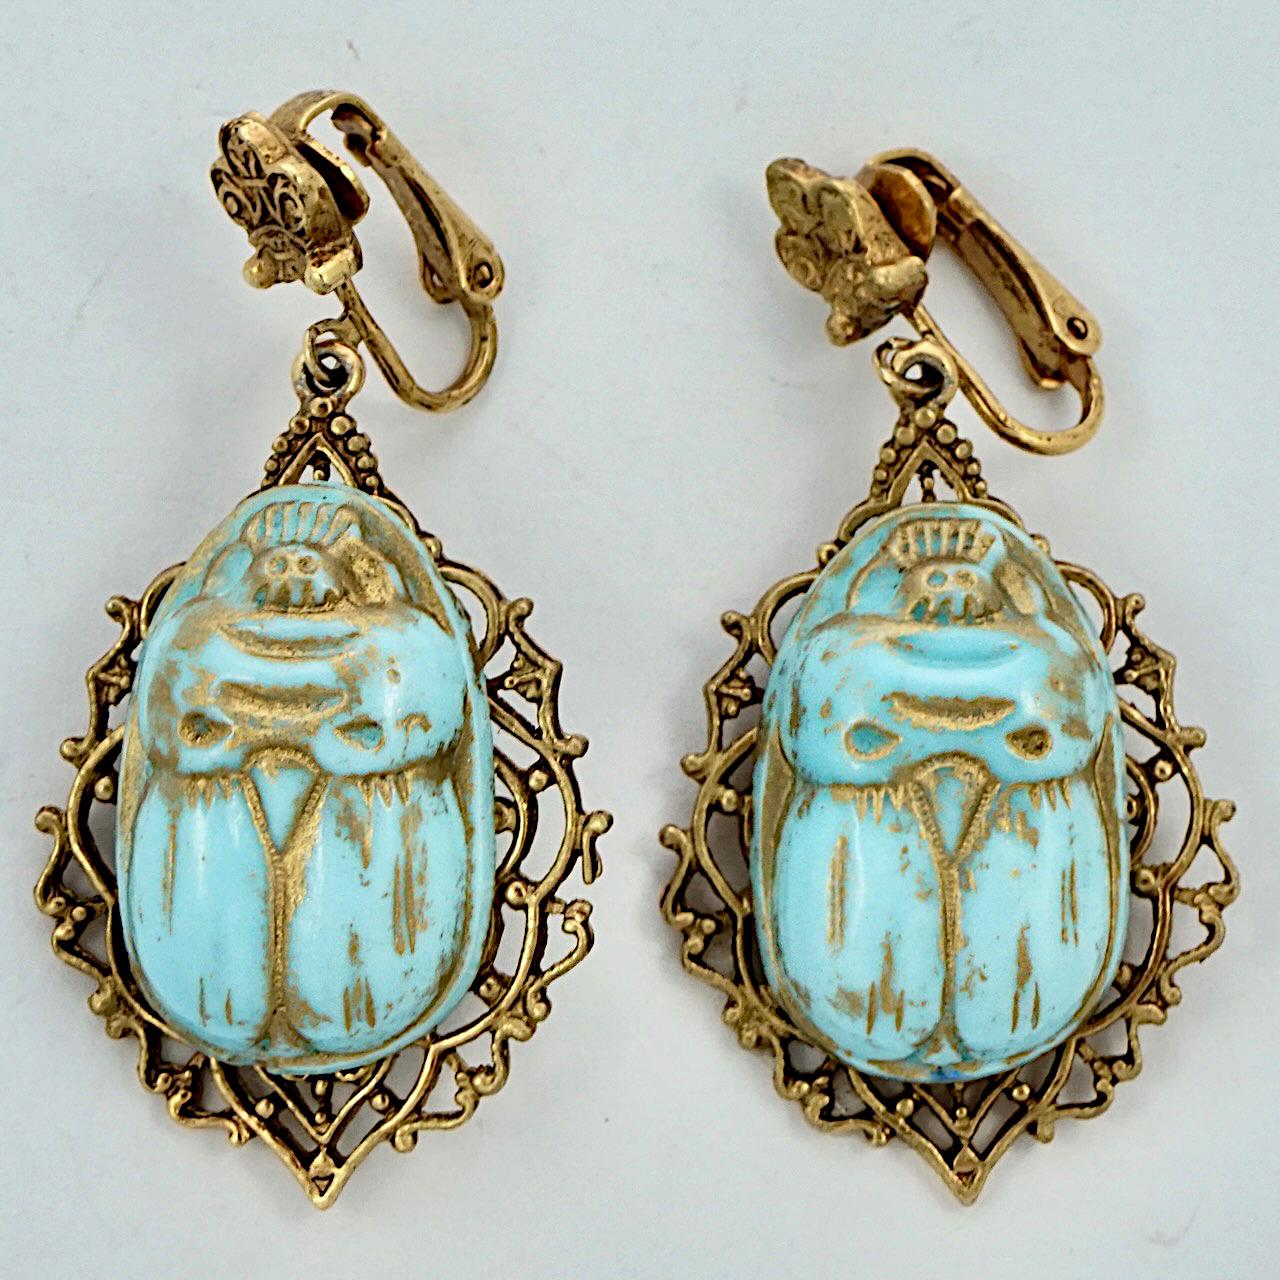 Fabulous Czech Egyptian Revival ornate gold plated clip on drop earrings, with lovely pale blue and gold painted glass scarabs. Measuring length 5.1 cm / 2 inches including the clips, by width 2.6 cm / 1 inch.

This is a beautiful pair of Egyptian